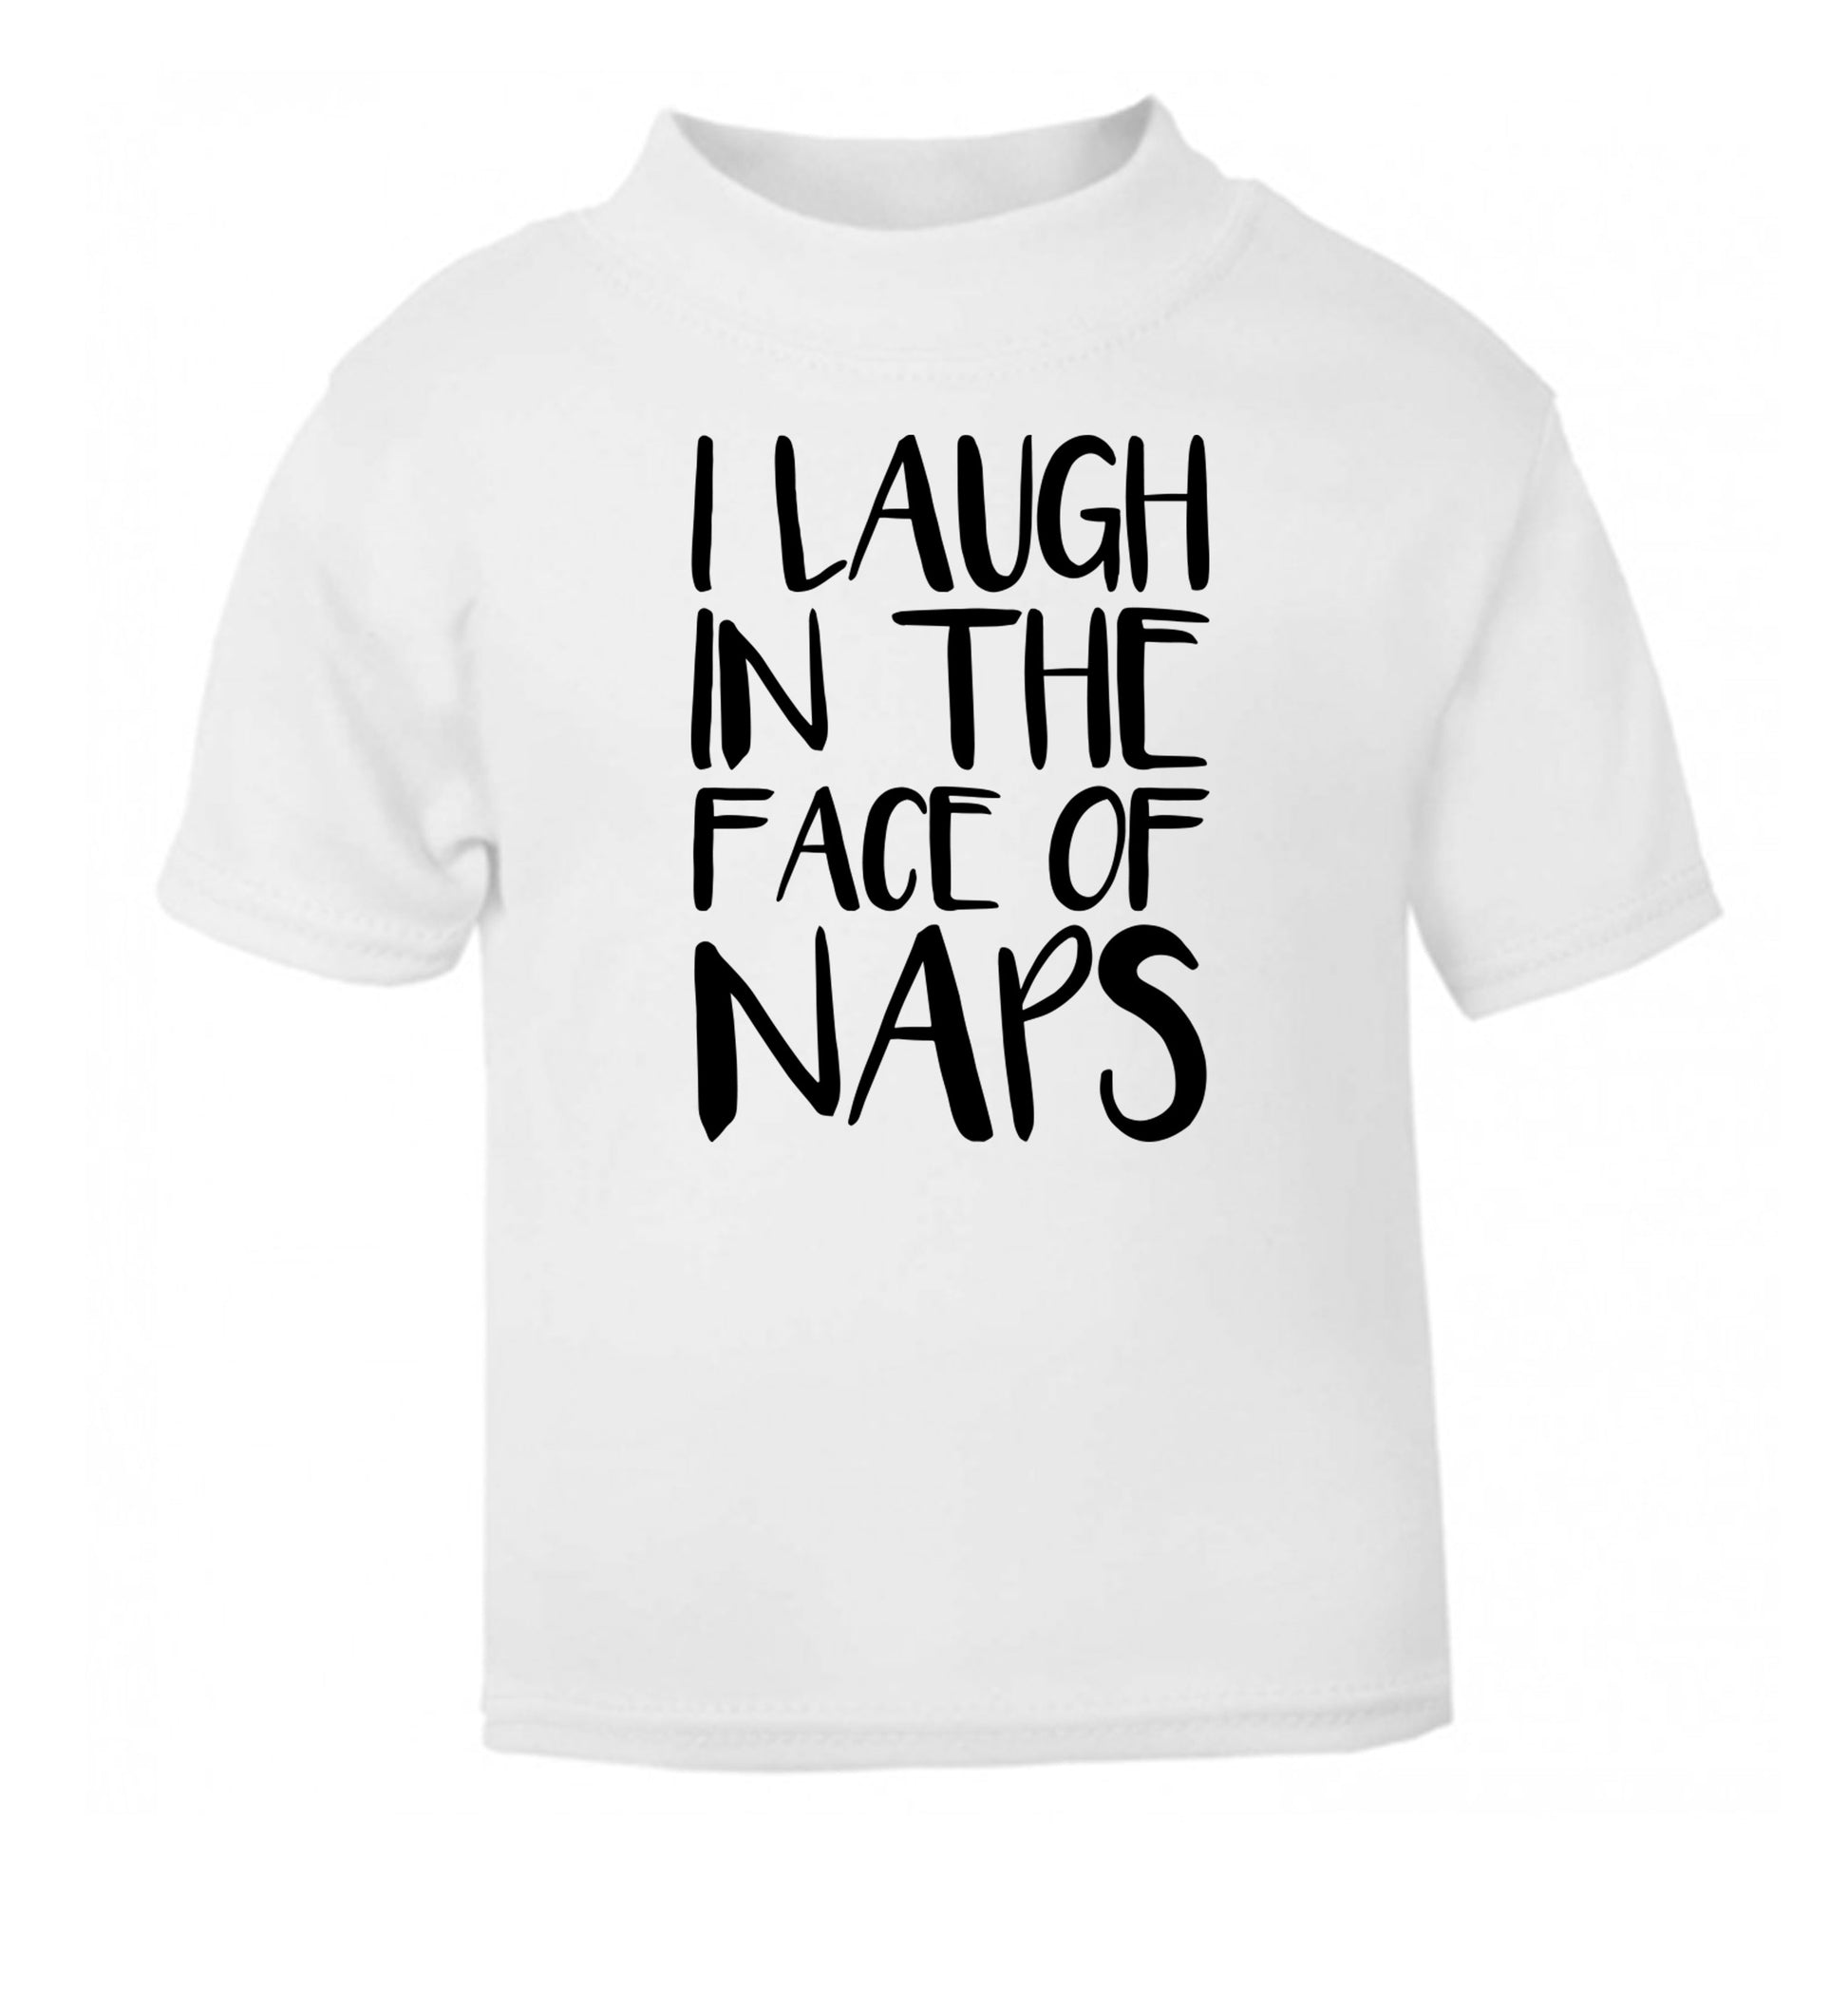 I laugh in the face of naps white Baby Toddler Tshirt 2 Years